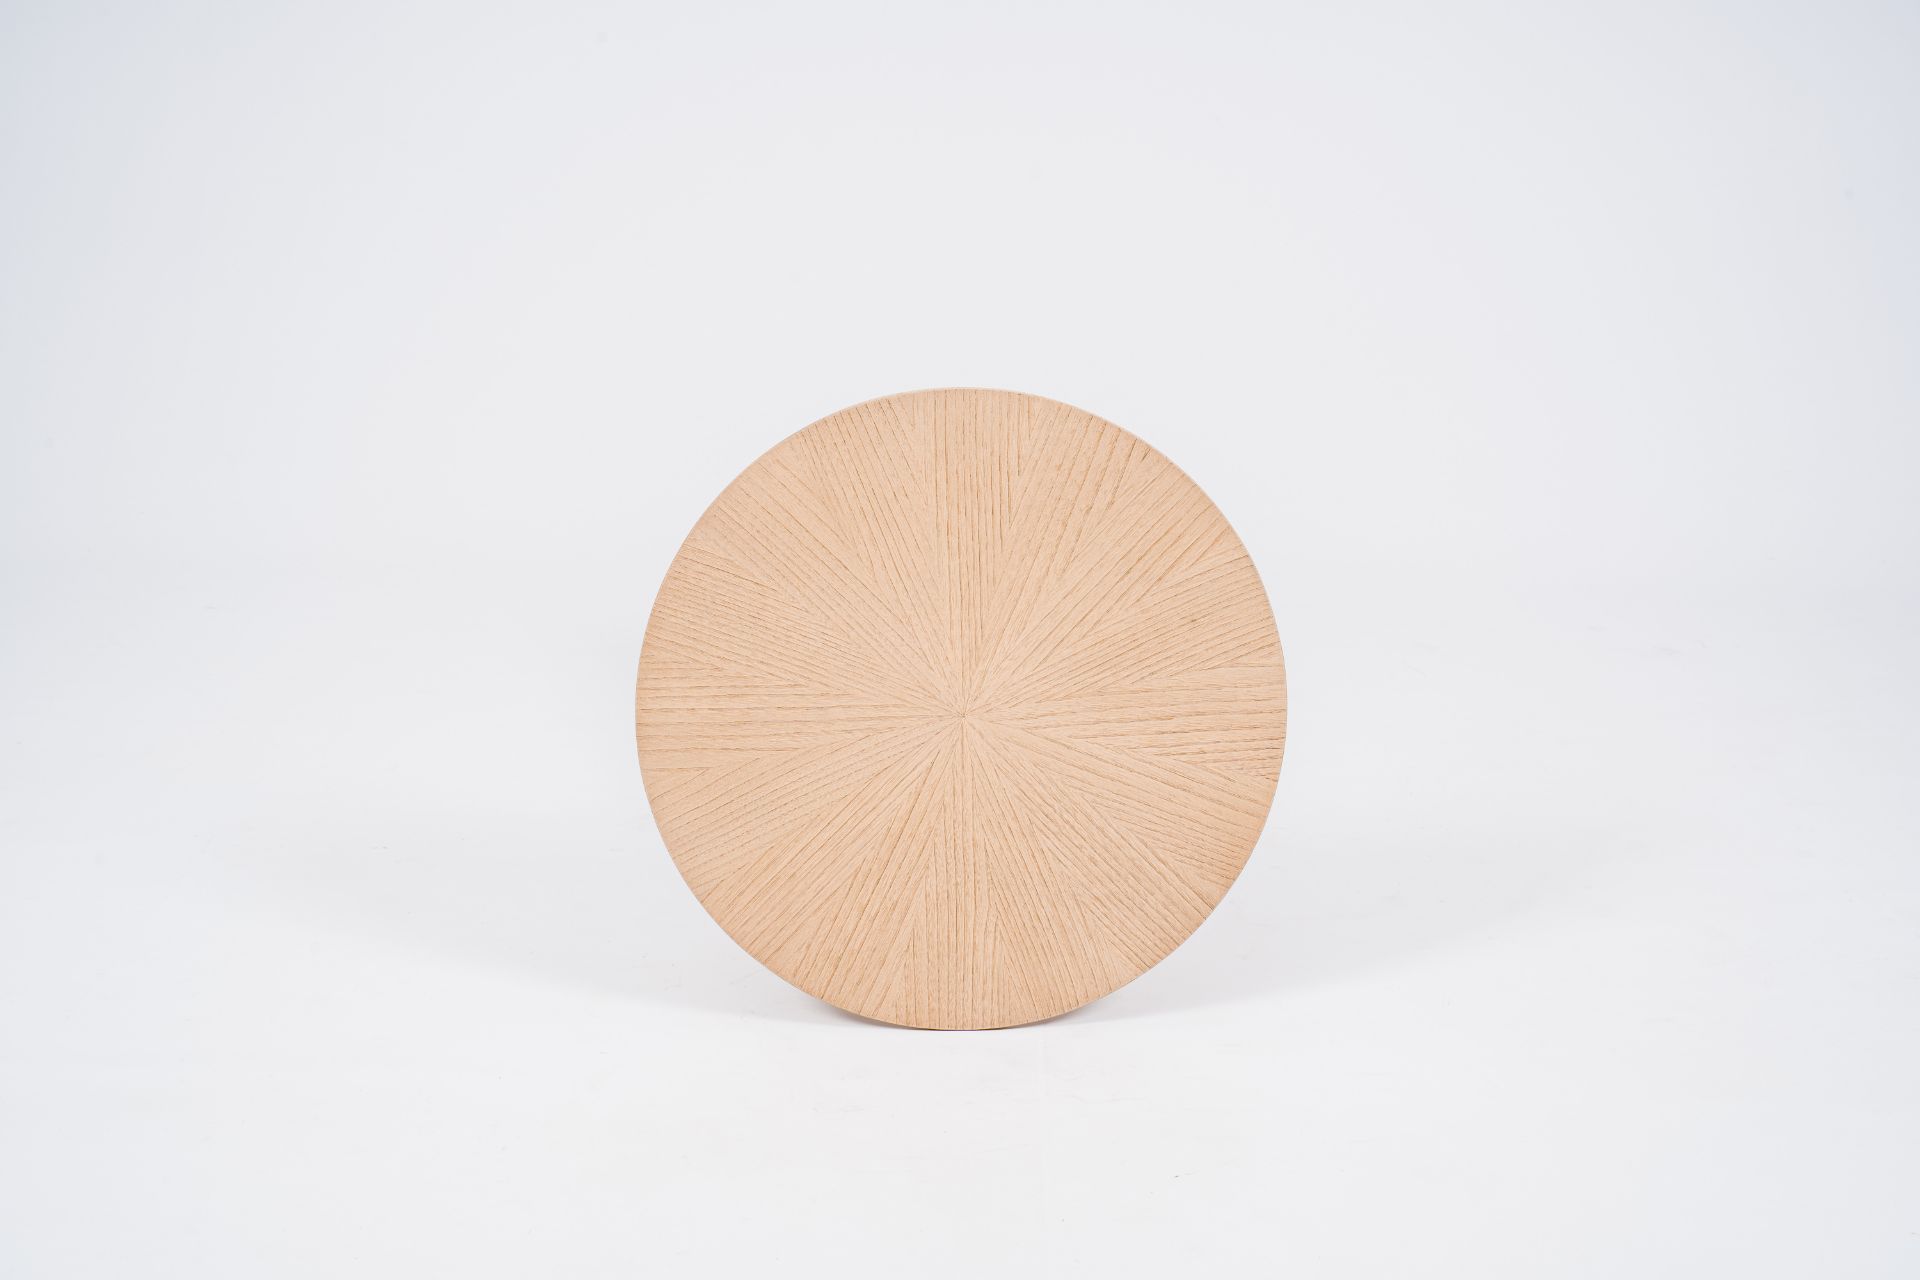 Olivier De Schrijver (1958): A partly gold-coloured solid wood Lily table, ed. 4/60, 21st C. - Image 6 of 9